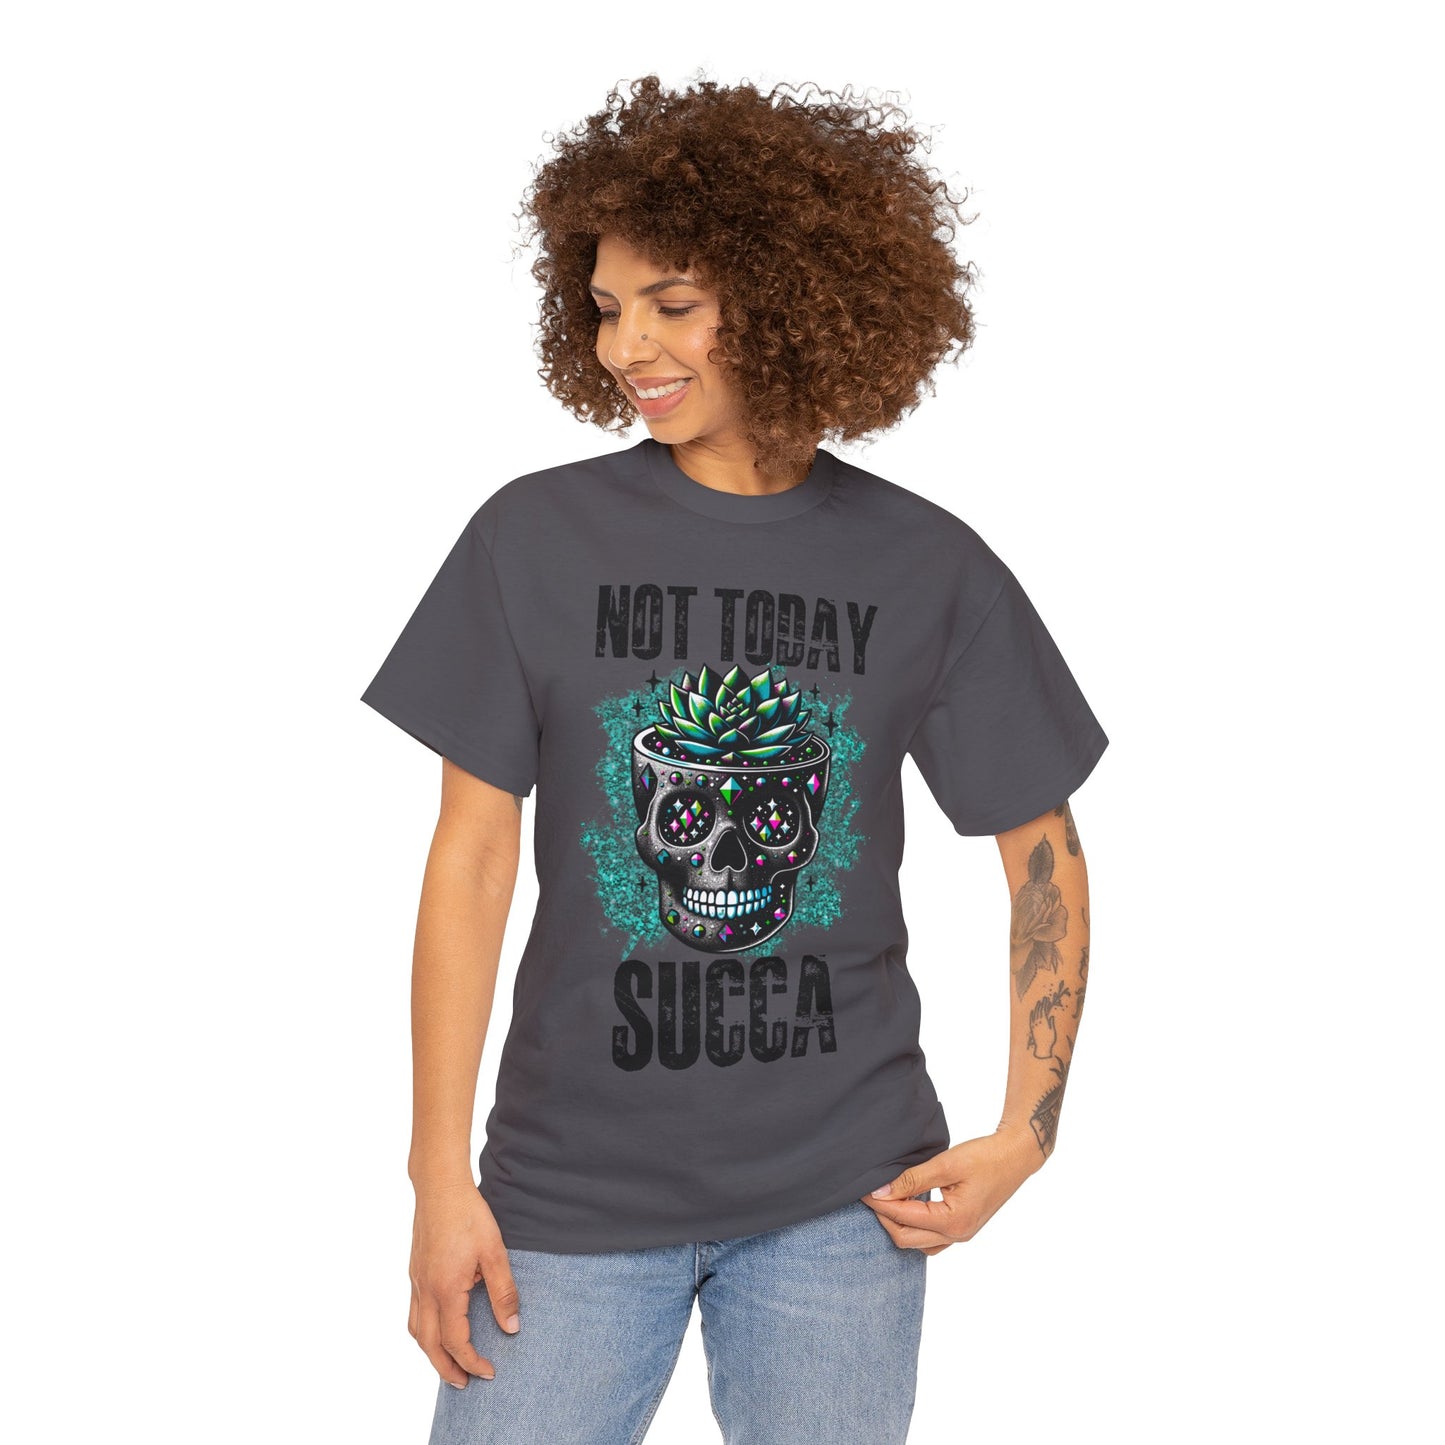 Not Today Succa Tshirt